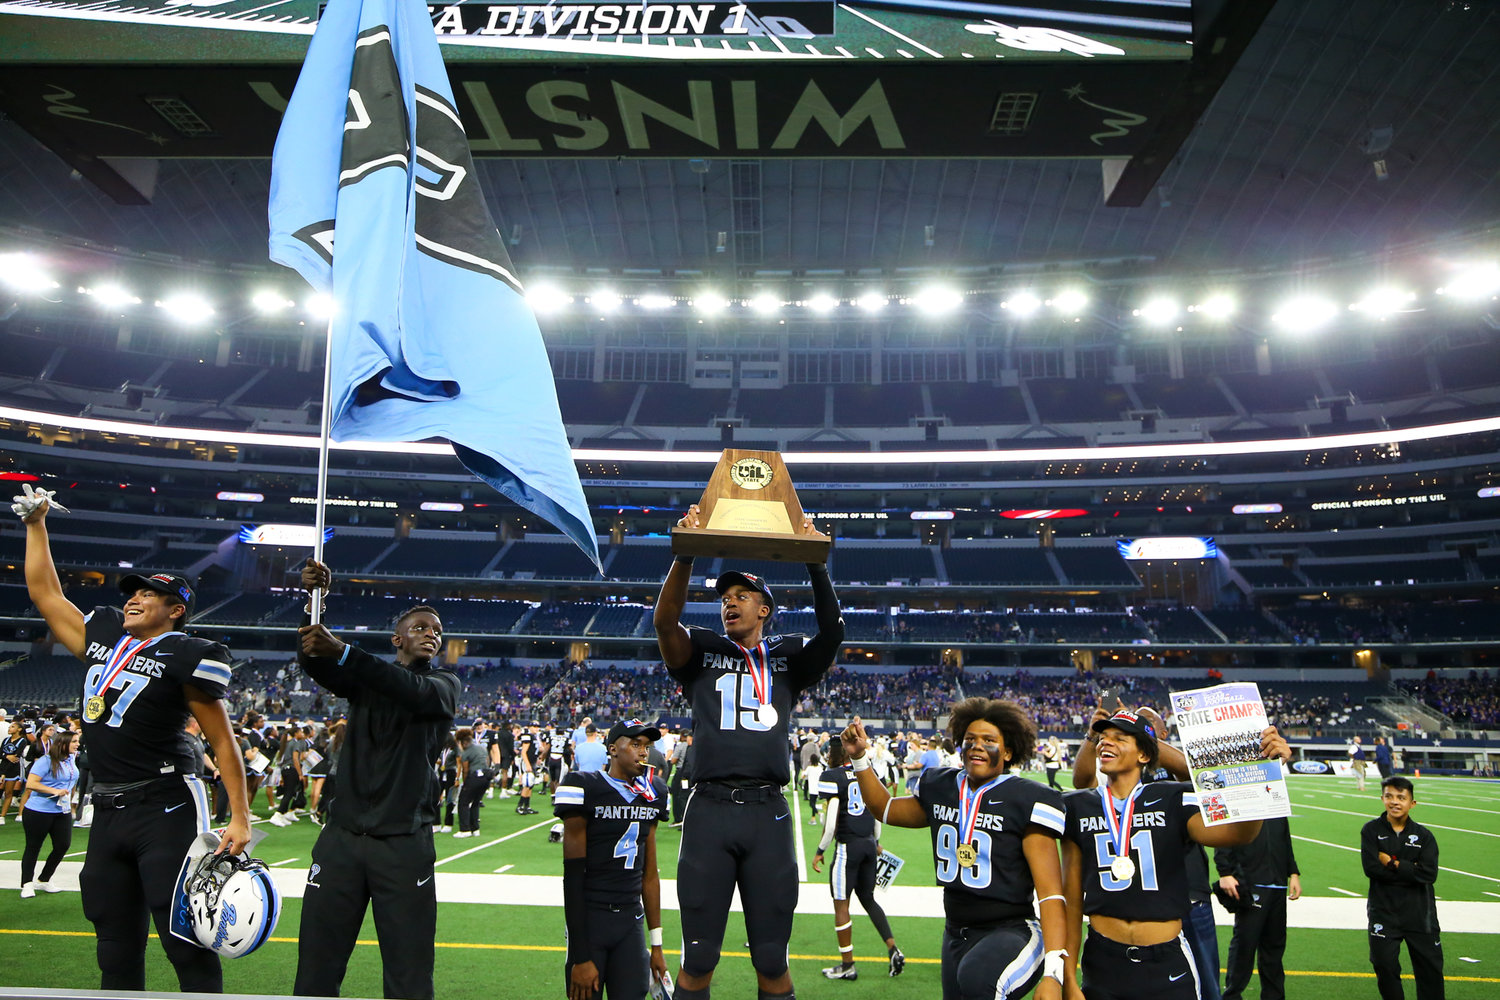 Paetow Panthers players celebrate a 27-24 win over College Station in the Class 5A Division I state football championship game on December 17, 2021 in Arlington, Texas.